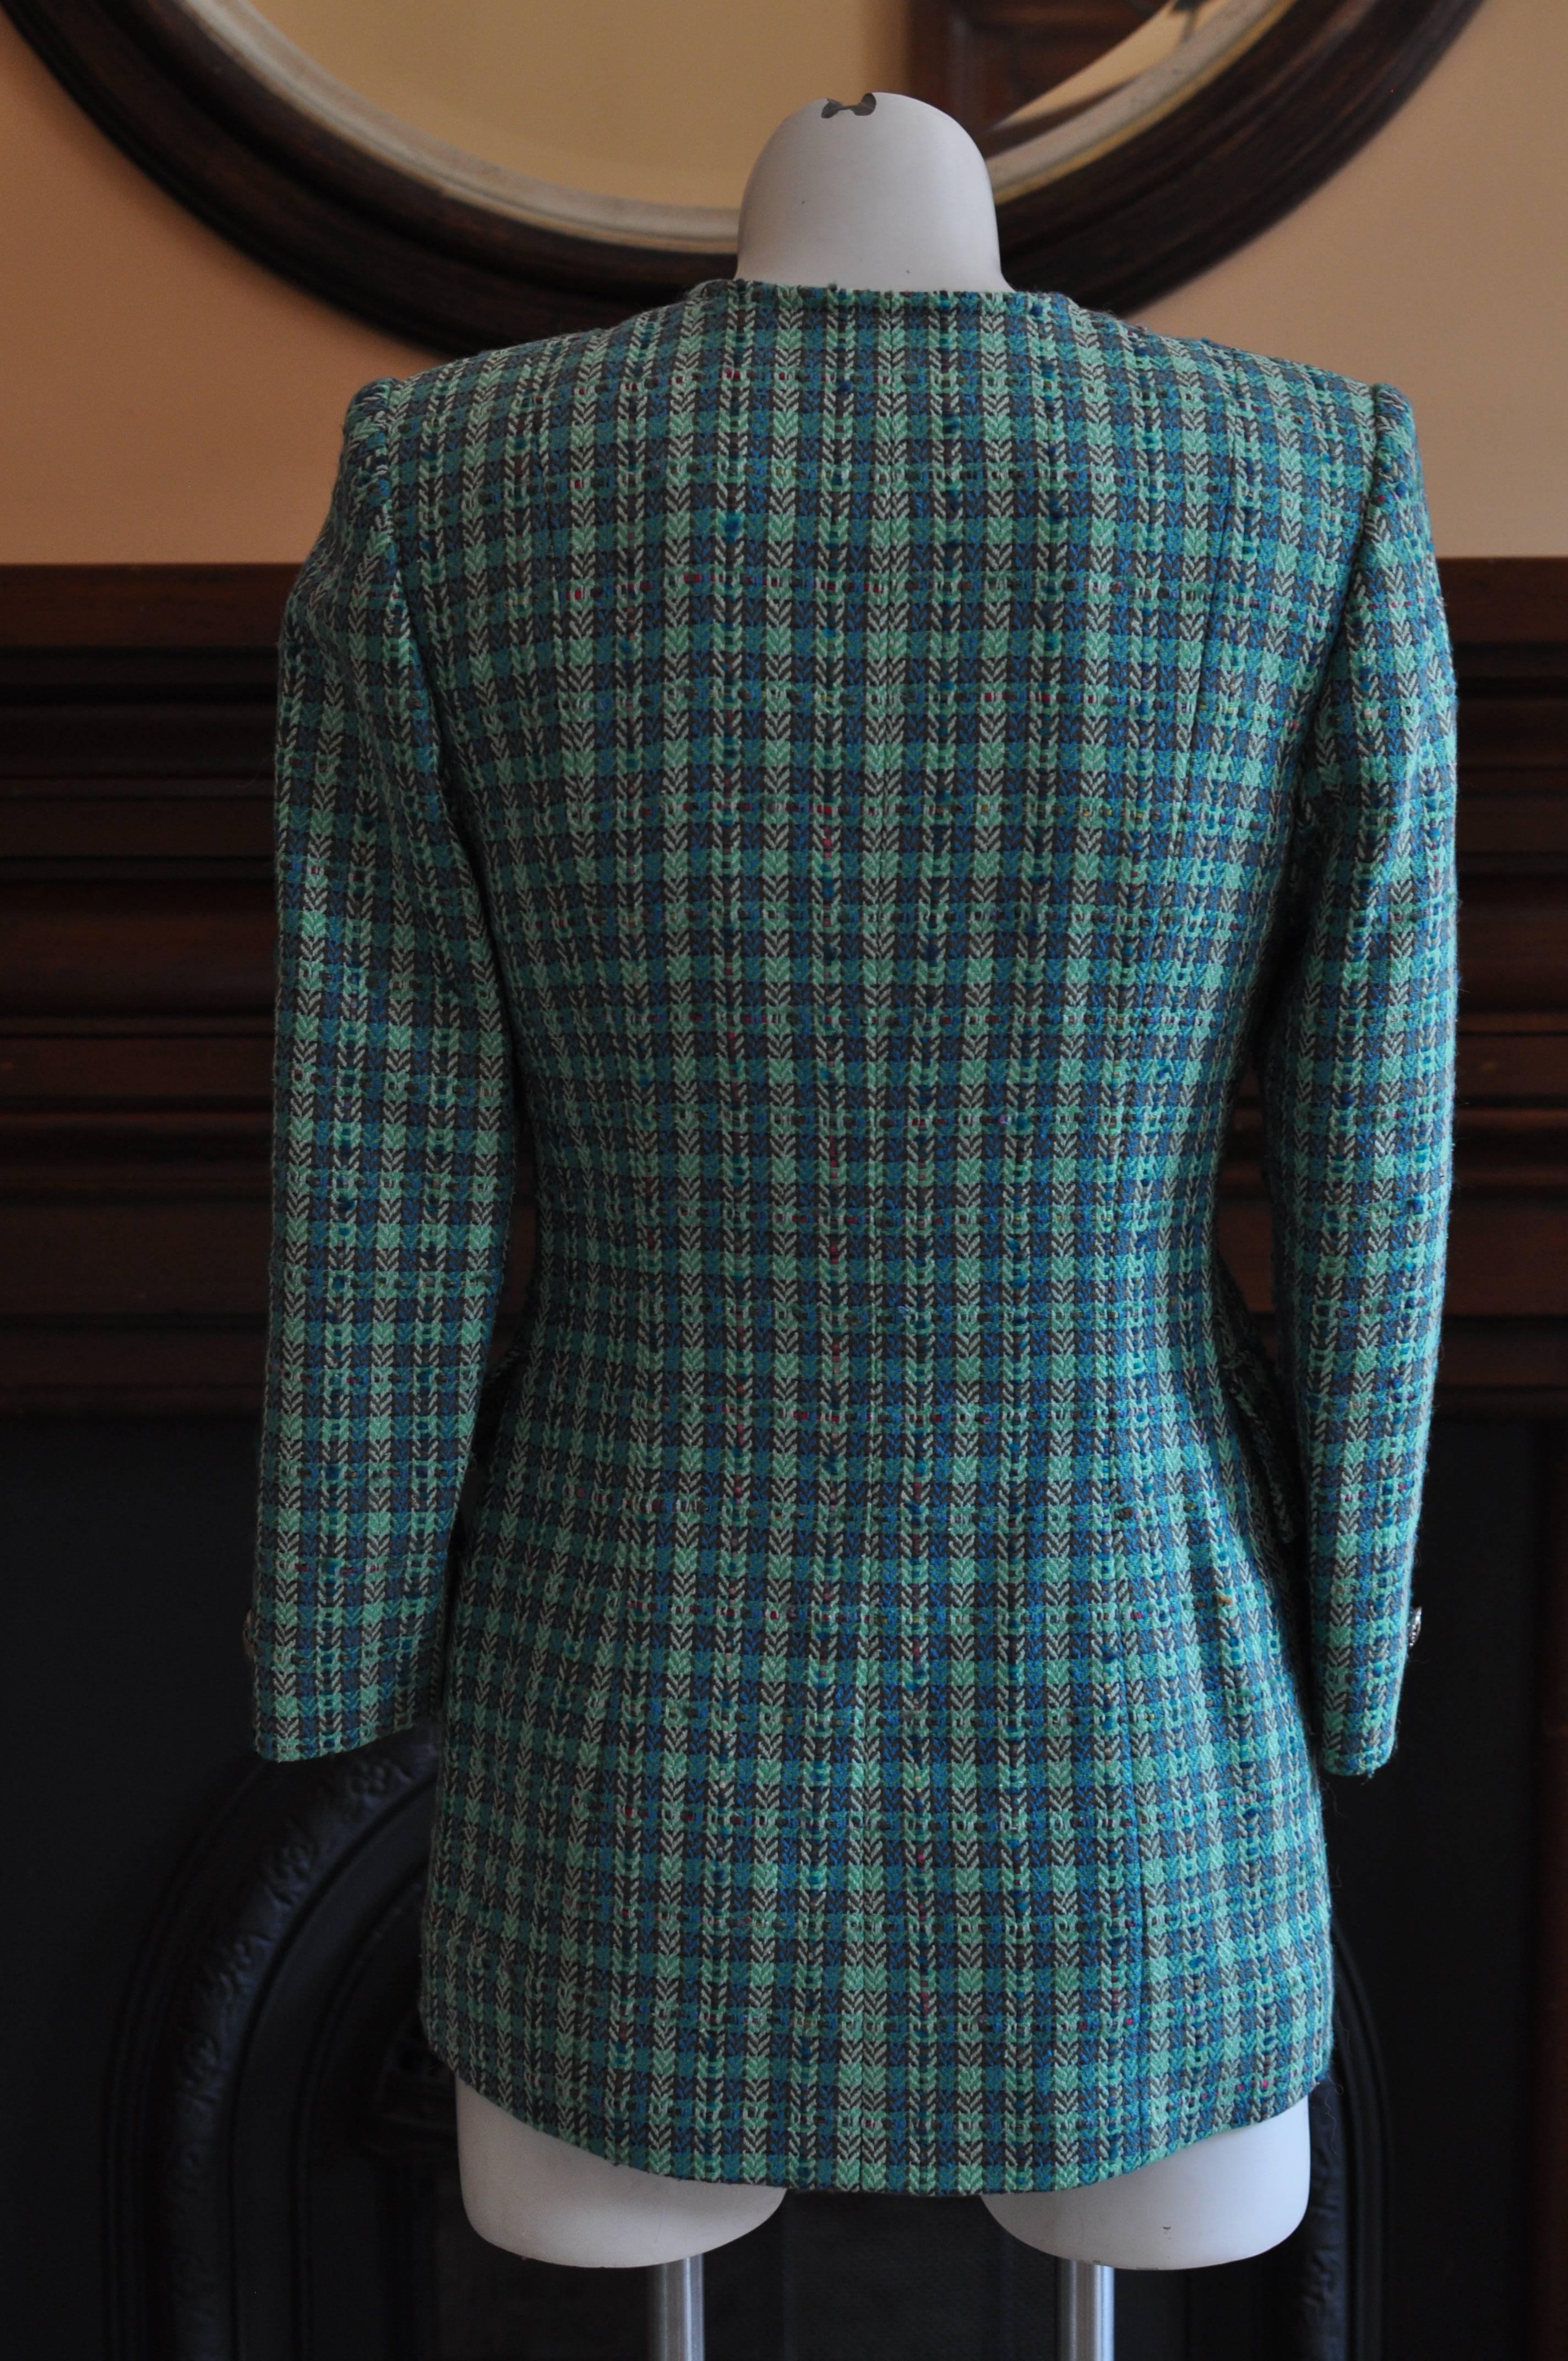 Equestrian jacket look with longer back; v-neckline; two slanted front deep pockets and lovely silver Nina Ricci buttons (6). Multicolored with an emphasis on greens.